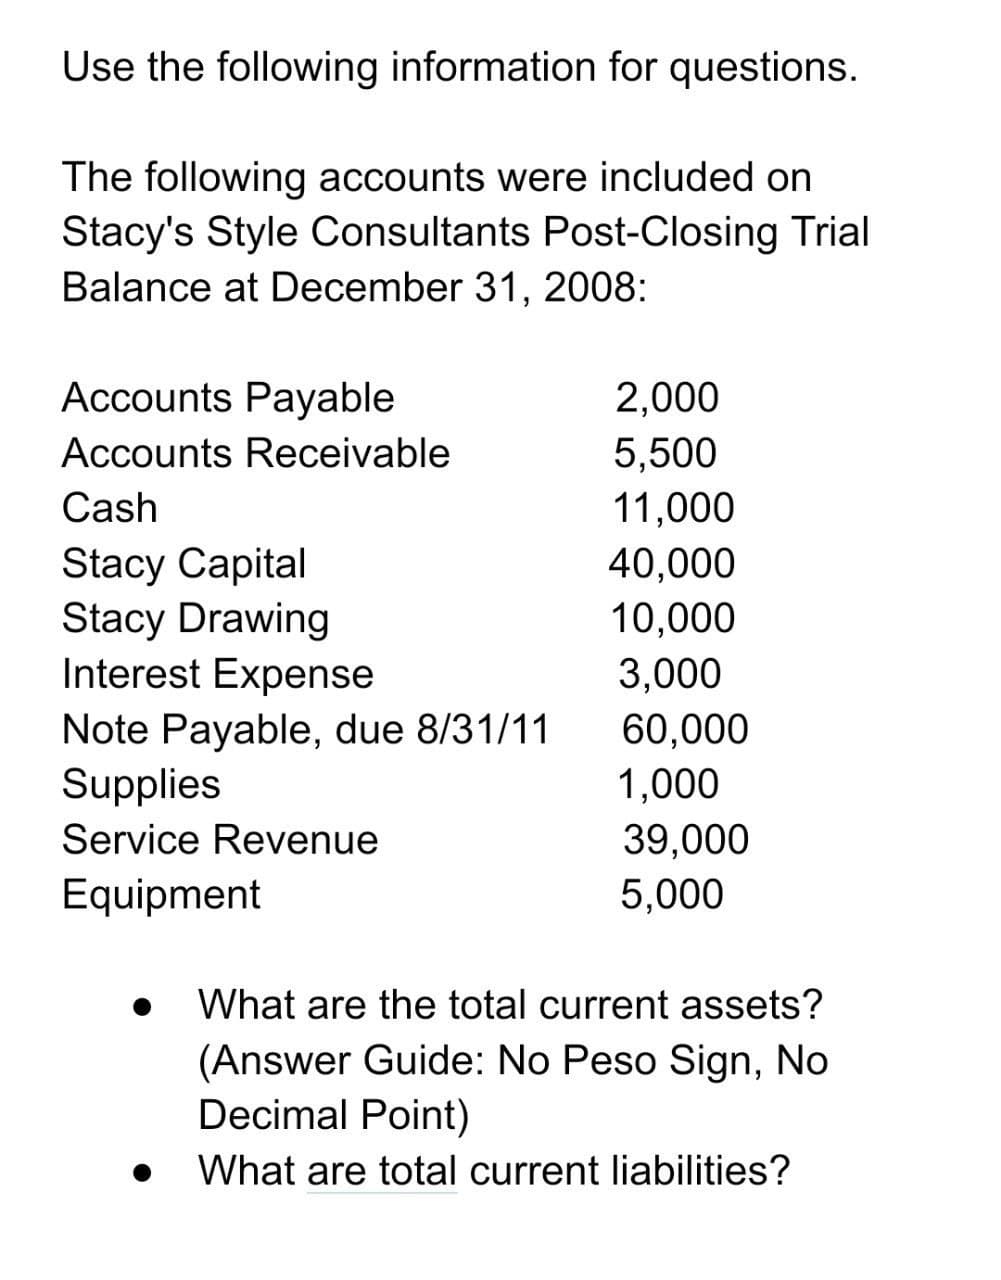 Use the following information for questions.
The following accounts were included on
Stacy's Style Consultants Post-Closing Trial
Balance at December 31, 2008:
Accounts Payable
2,000
5,500
11,000
Accounts Receivable
Cash
Stacy Capital
Stacy Drawing
Interest Expense
40,000
10,000
3,000
Note Payable, due 8/31/11
Supplies
60,000
1,000
Service Revenue
39,000
5,000
Equipment
What are the total current assets?
(Answer Guide: No Peso Sign, No
Decimal Point)
What are total current liabilities?
